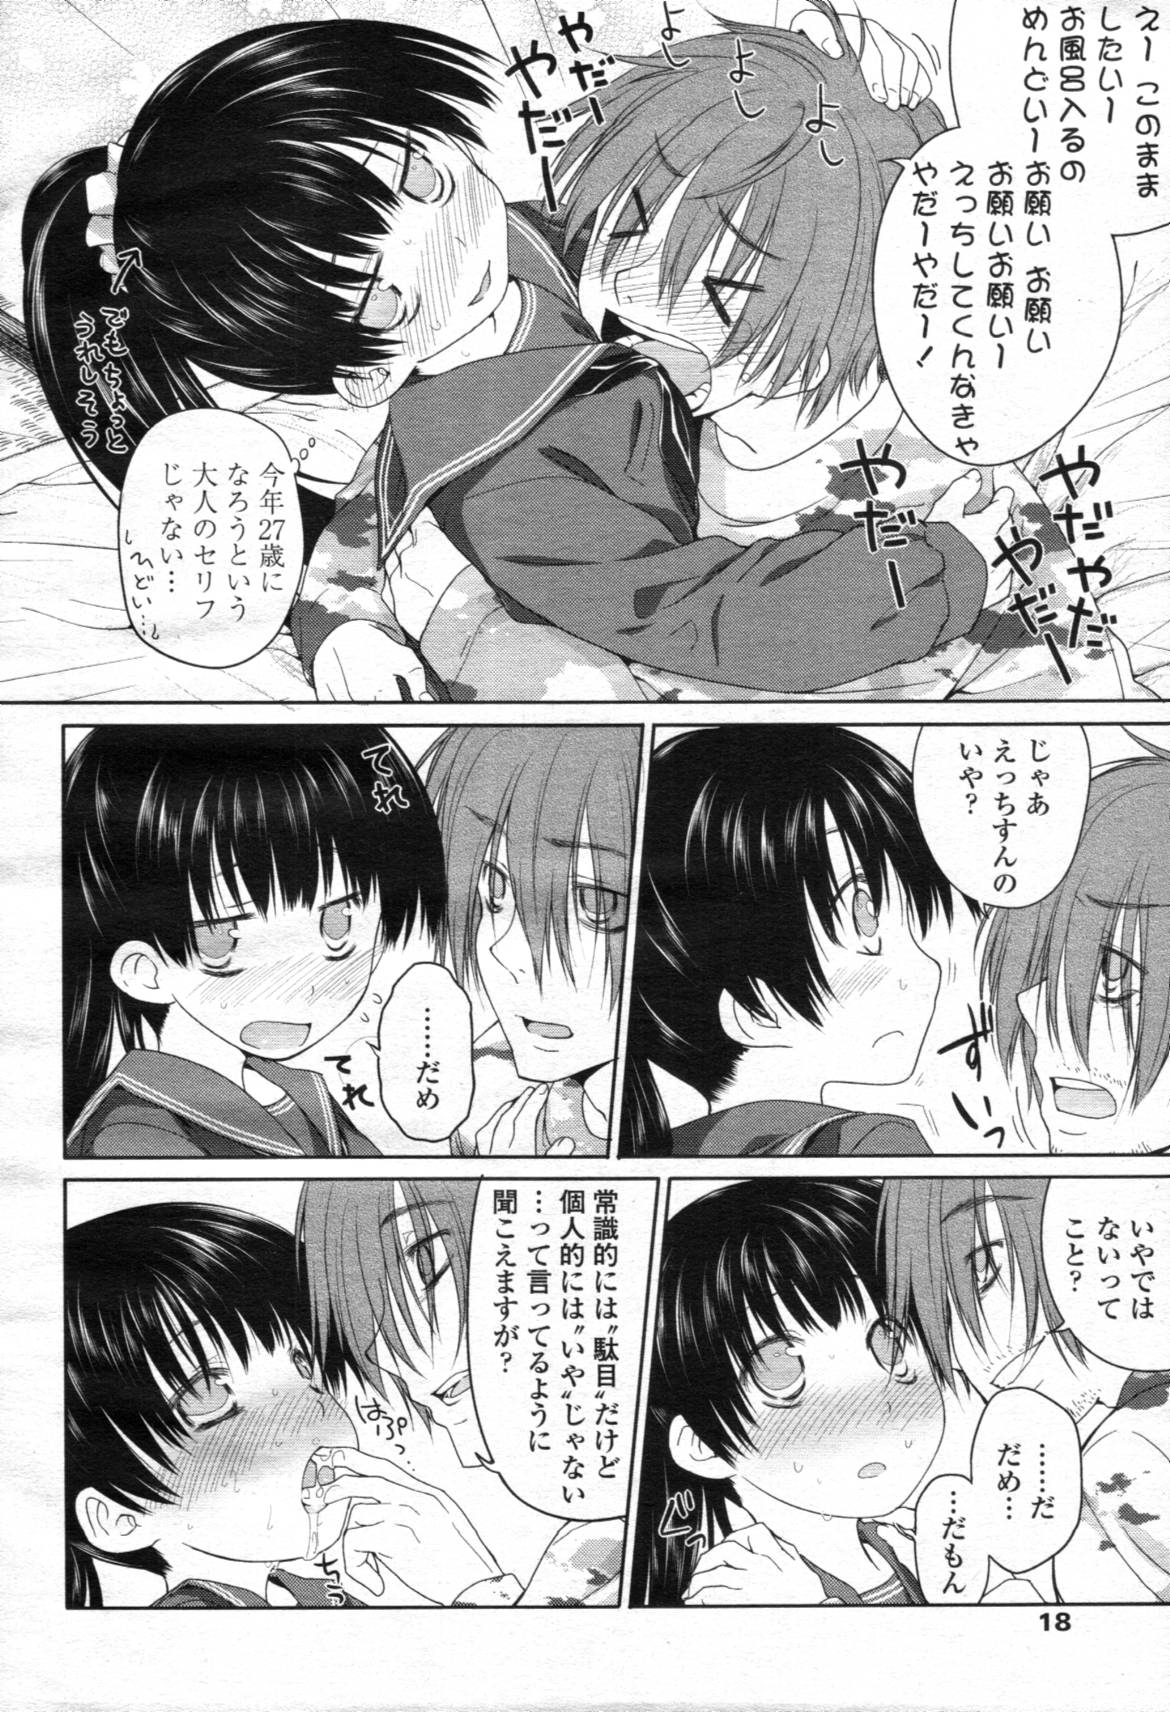 COMIC Tenma 2012-05 [Incomplete] page 19 full